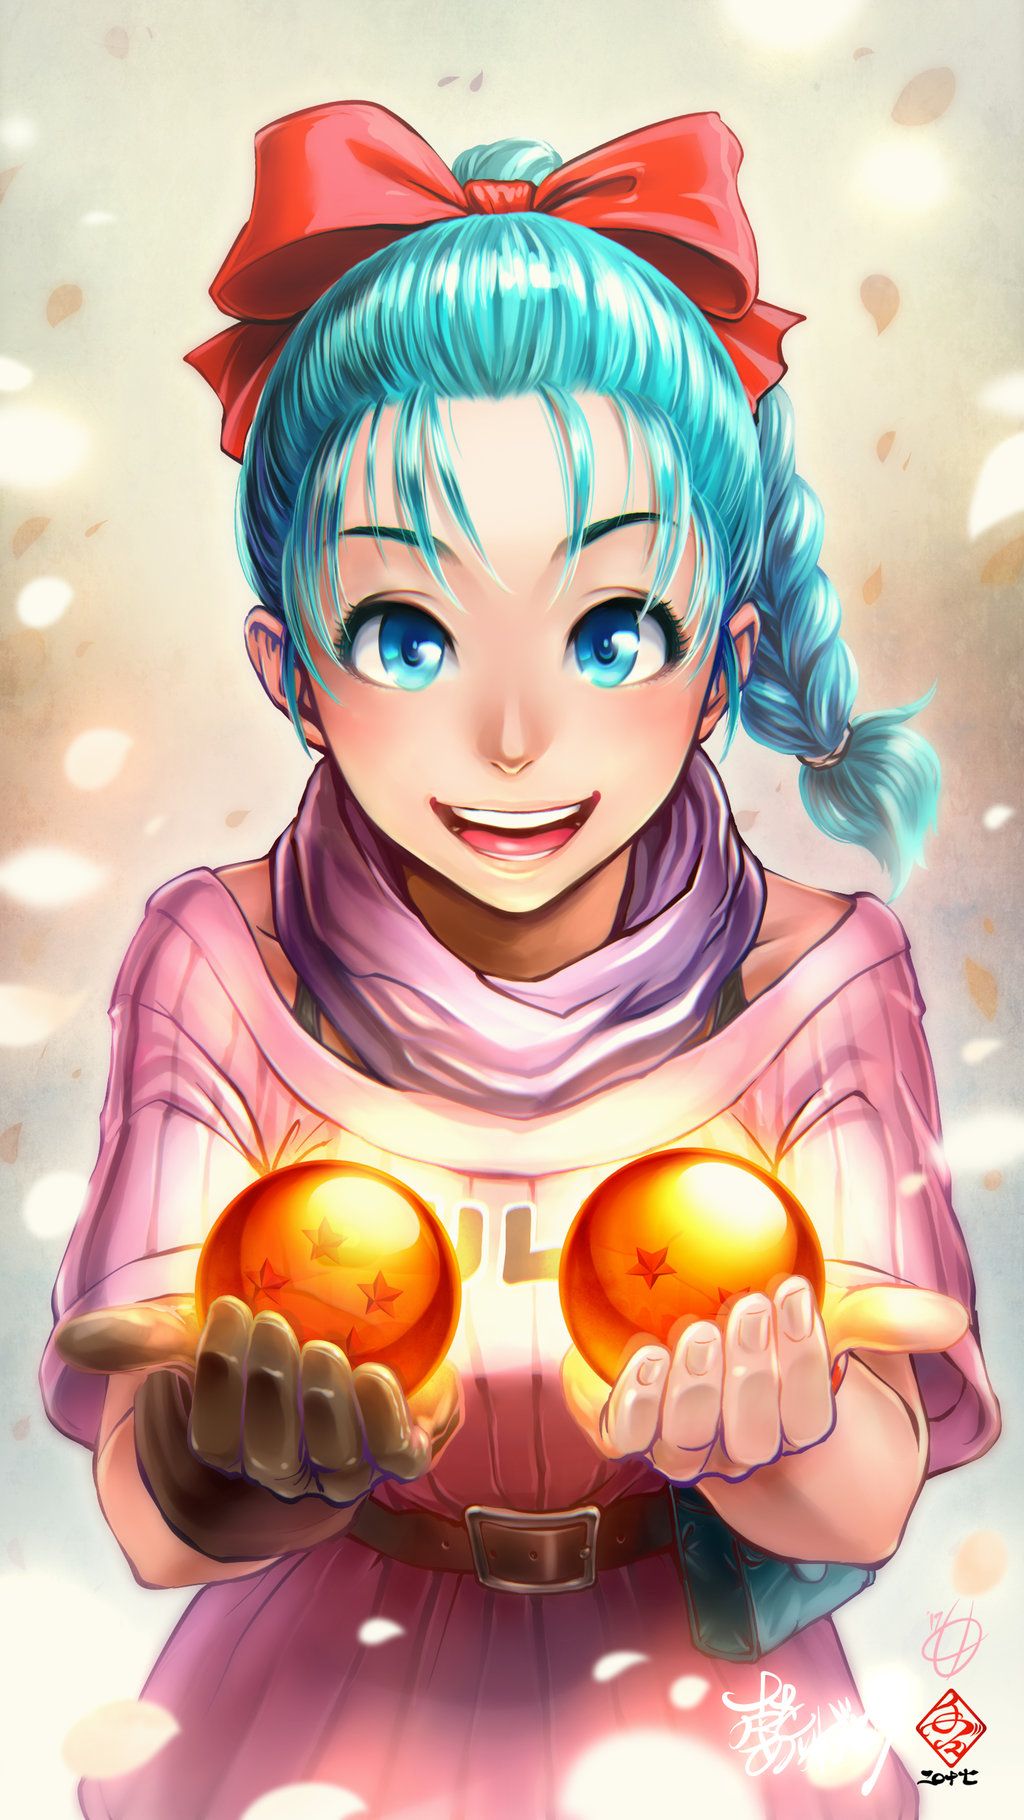 azmi awi recommends bulma from dragon ball z pic